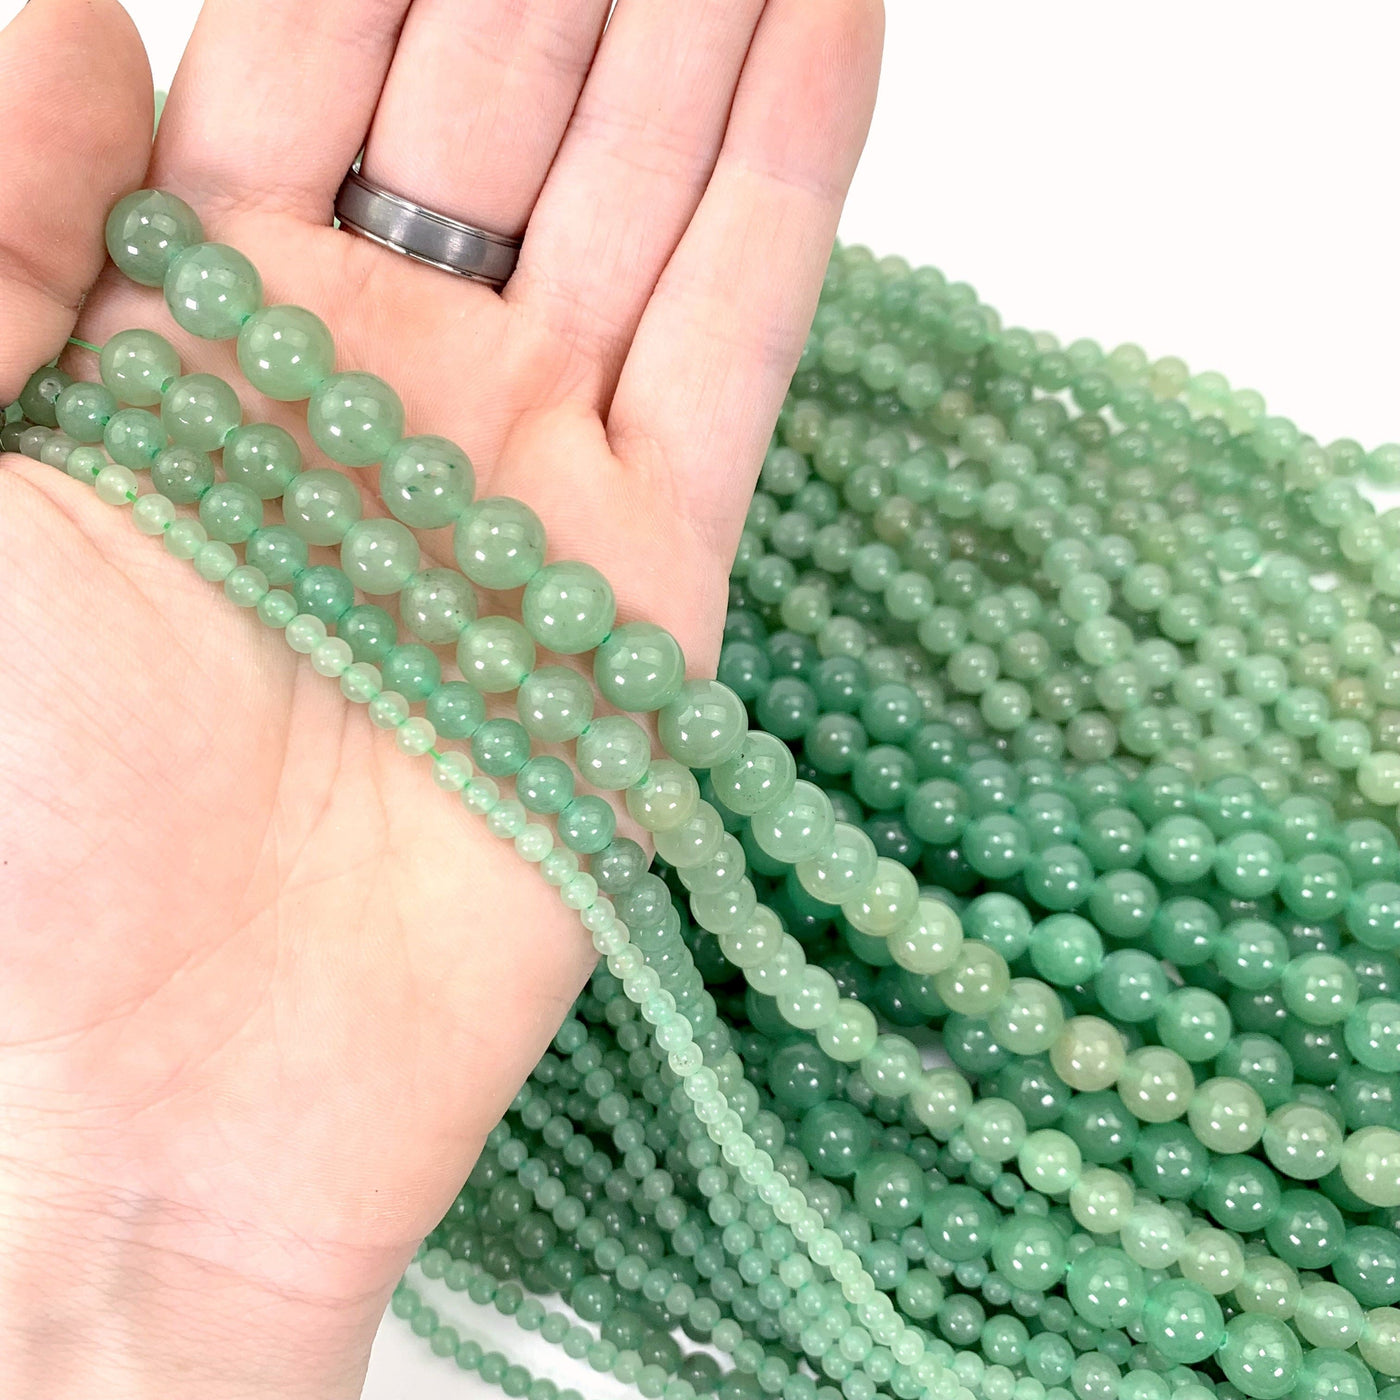 all 4 variations in hand with more green aventurine beads in background on a solid white background